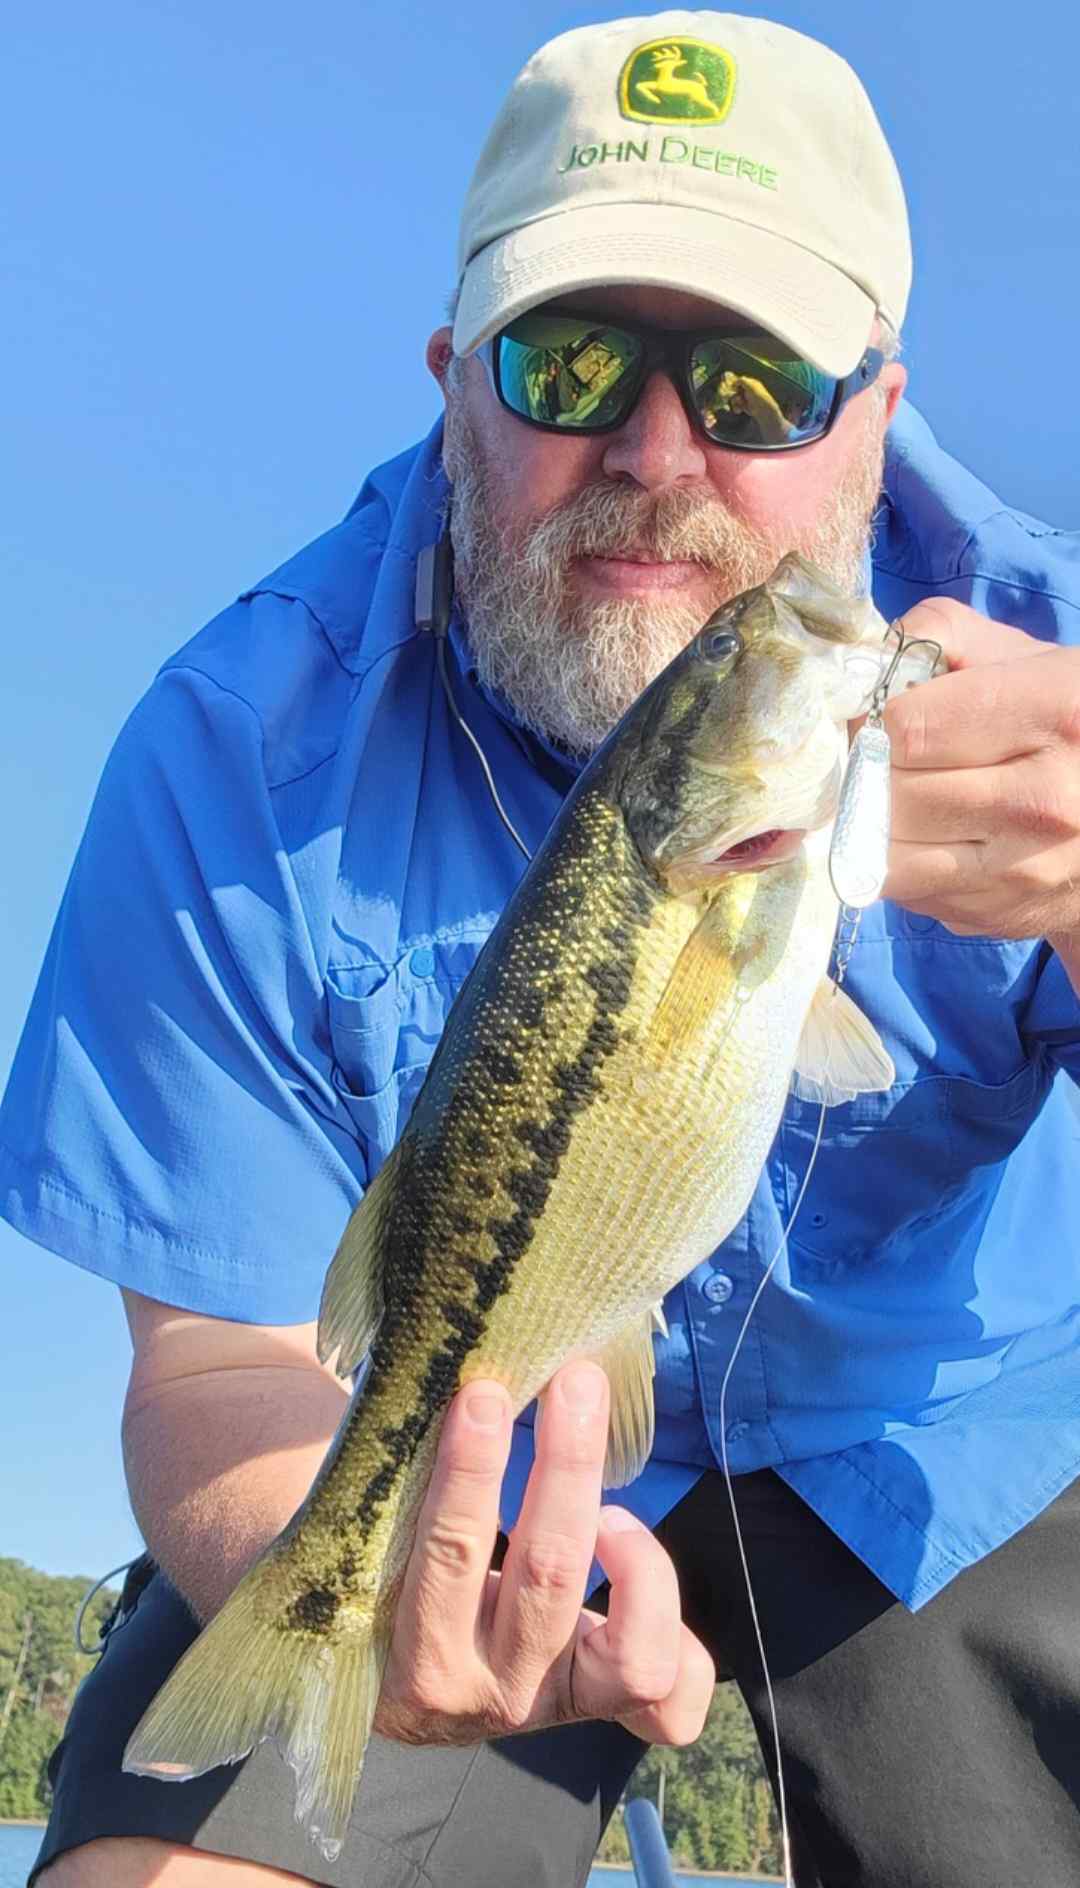 Latest Catch Pics Thread - Page 615 - Fishing Reports - Bass Fishing Forums